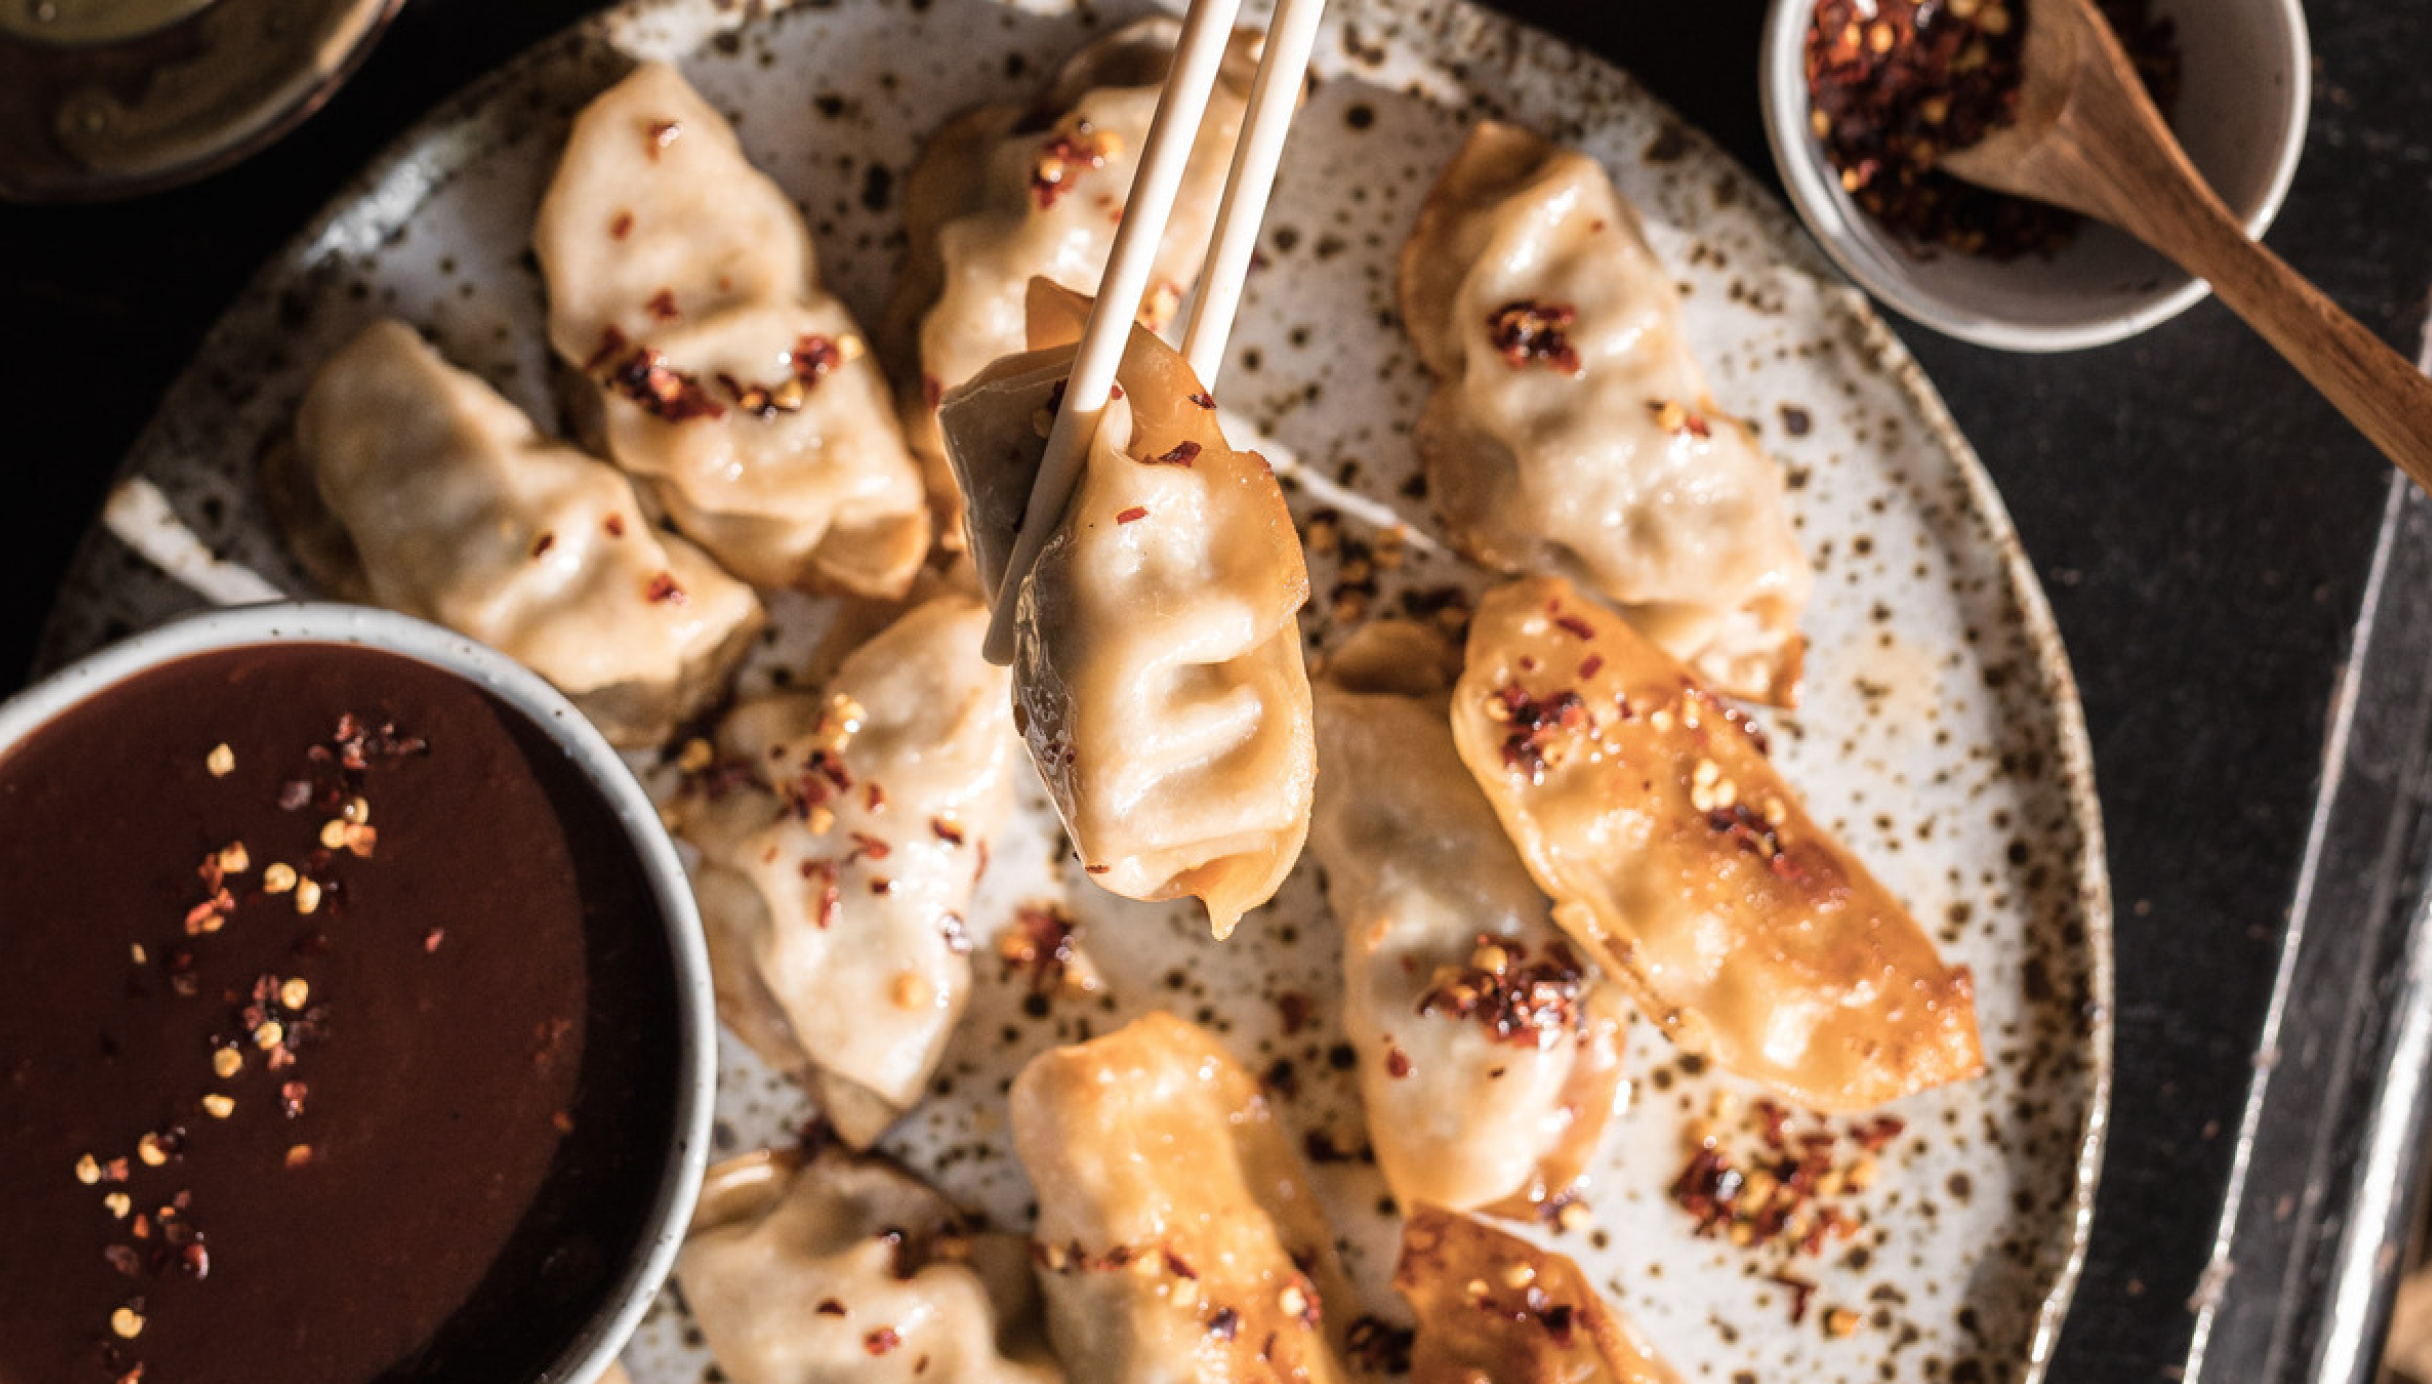 Dumplings being held by chopsticks, about to be dipped into plum sauce